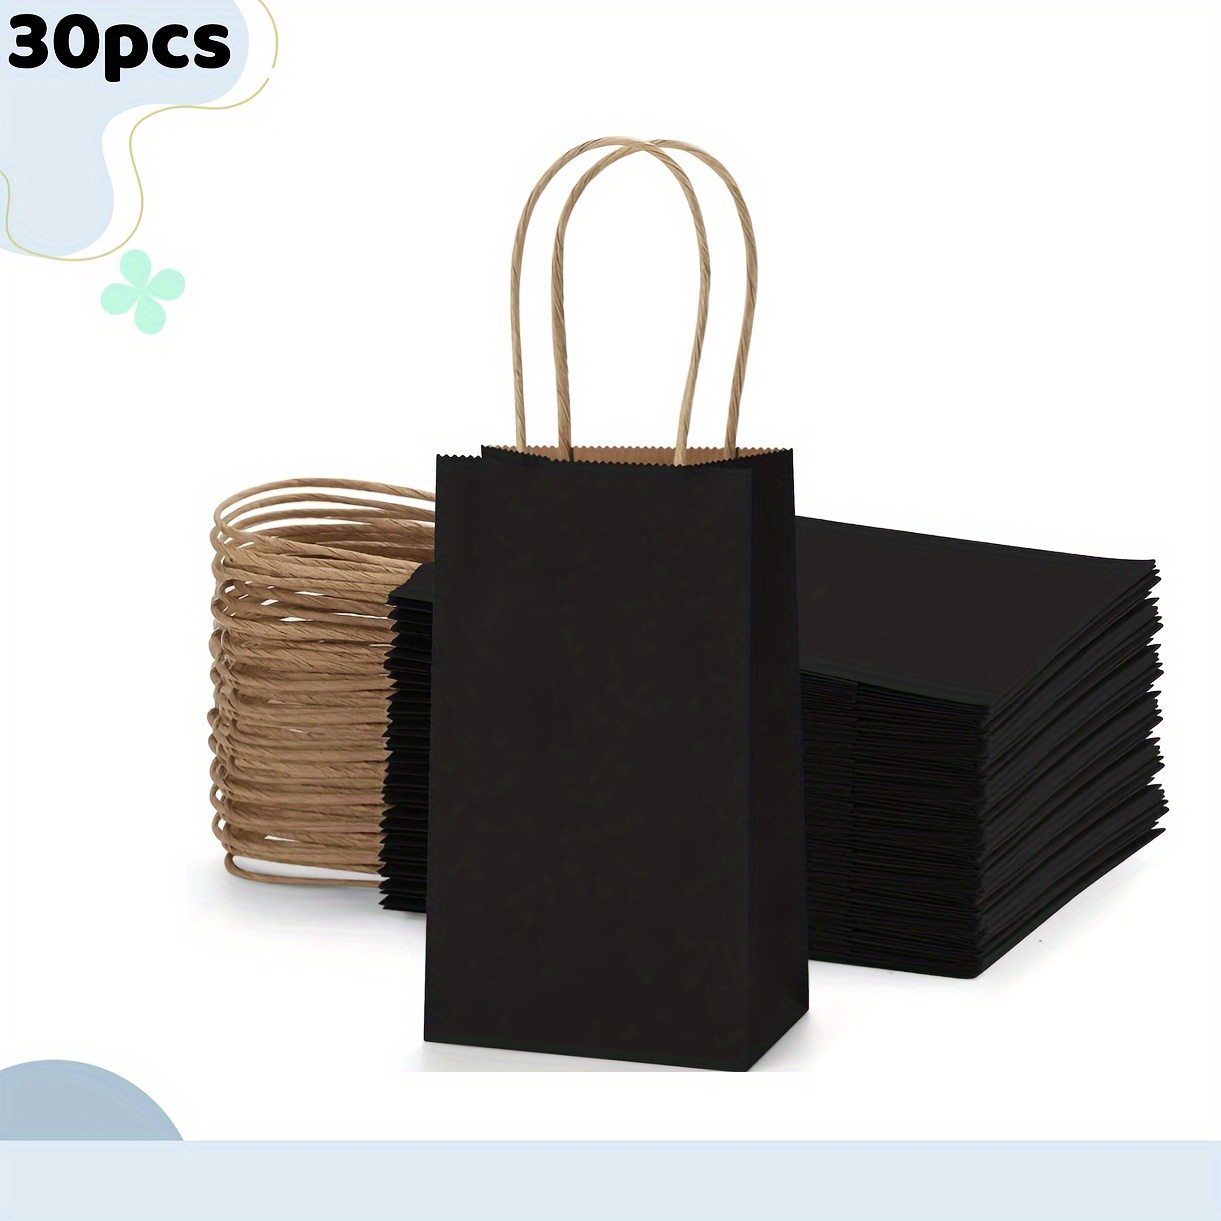 

30pcs, Black Mini Gift Bags Bulk,6x3.5x2.4 Inches Mini Kraft Gift Bags With Handles Bulk, Party Favor Bags Candy Bags, Small Mini Bags For Business, Shopping, Retail, Small Gifts, Party Stuff